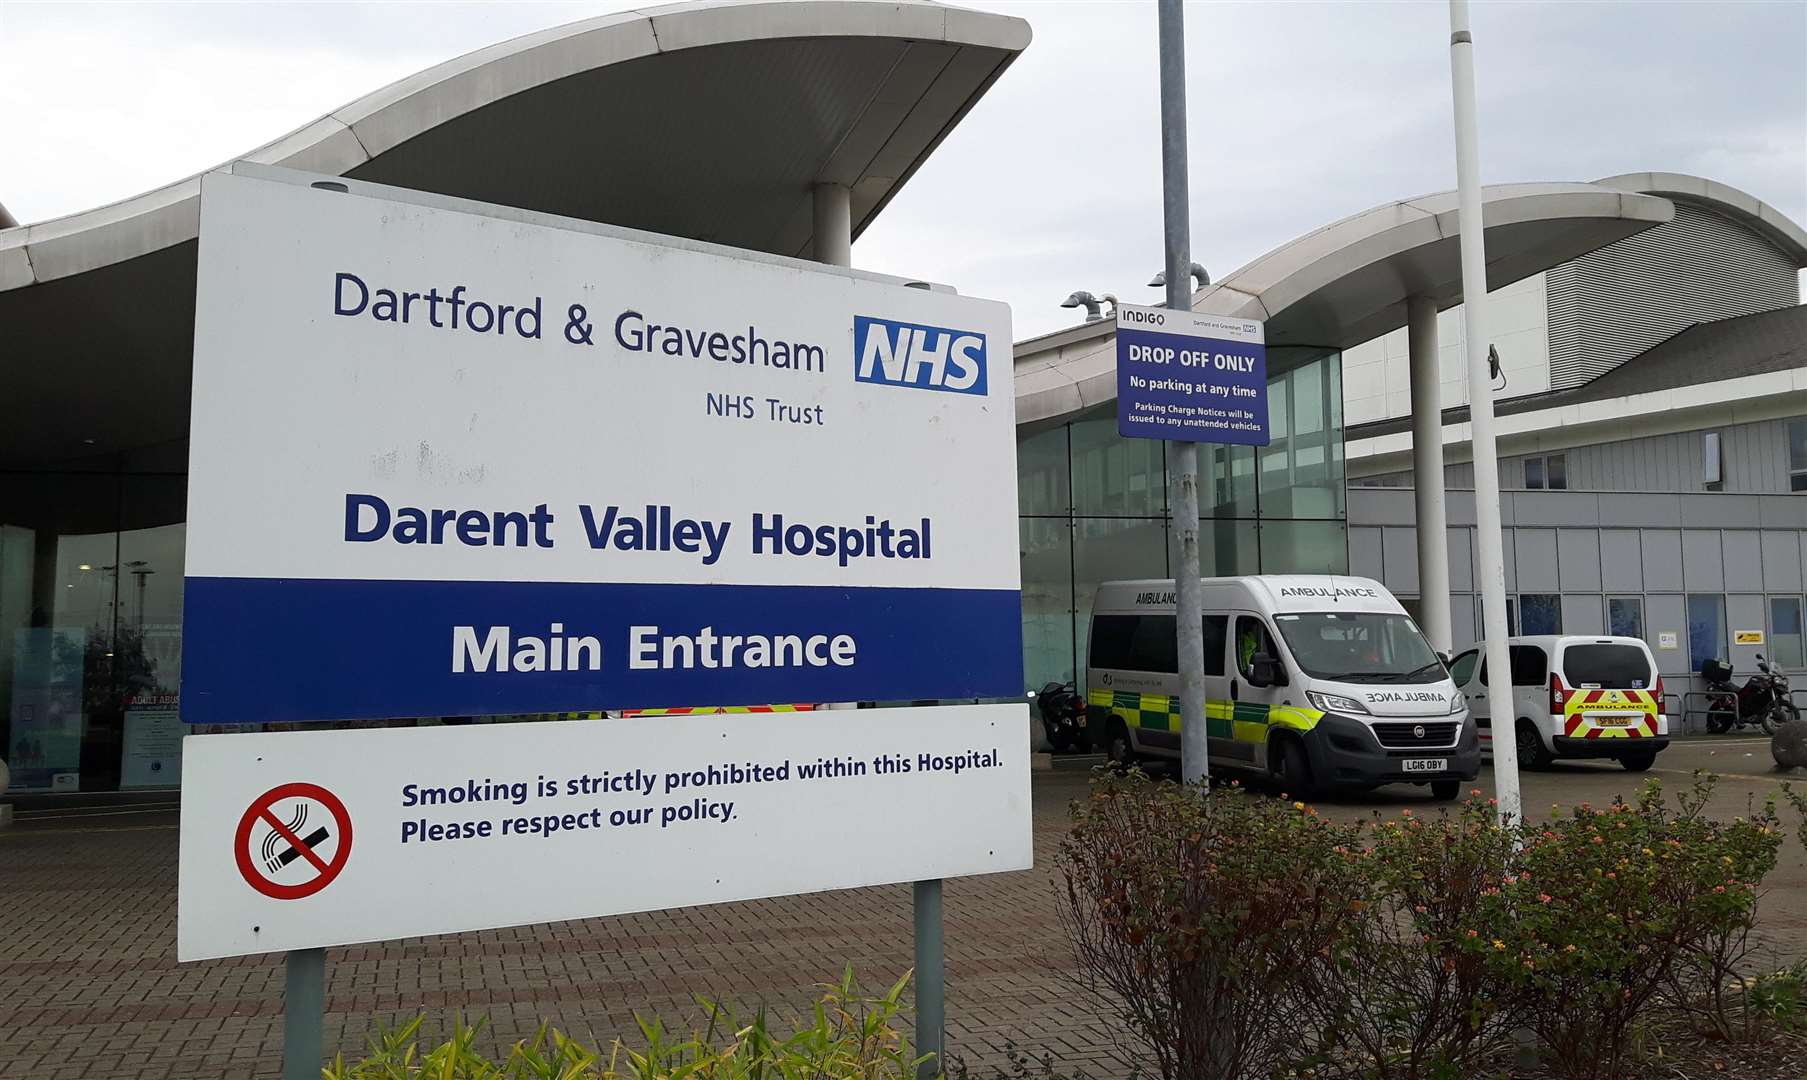 The inquest heard that Northfleet resident Karter Dhillon was treated at Darent Valley Hospital last year